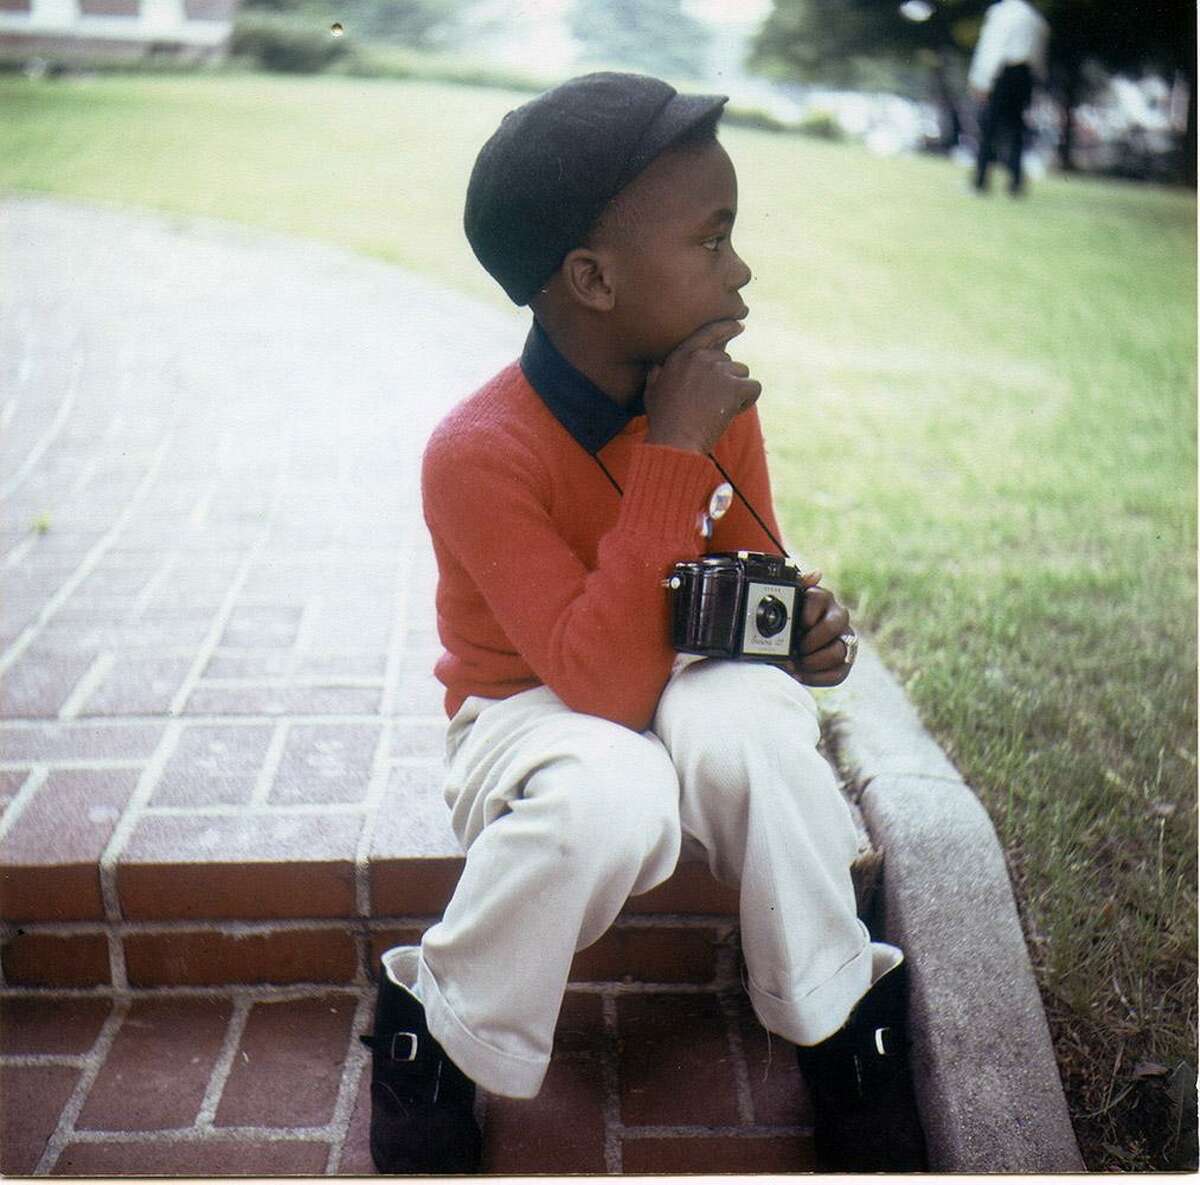 Photographer Fred Watkins at 7 years old in Greenwich, Conn. in a photo taken by his father, Reverend Fred Watkins, Sr.